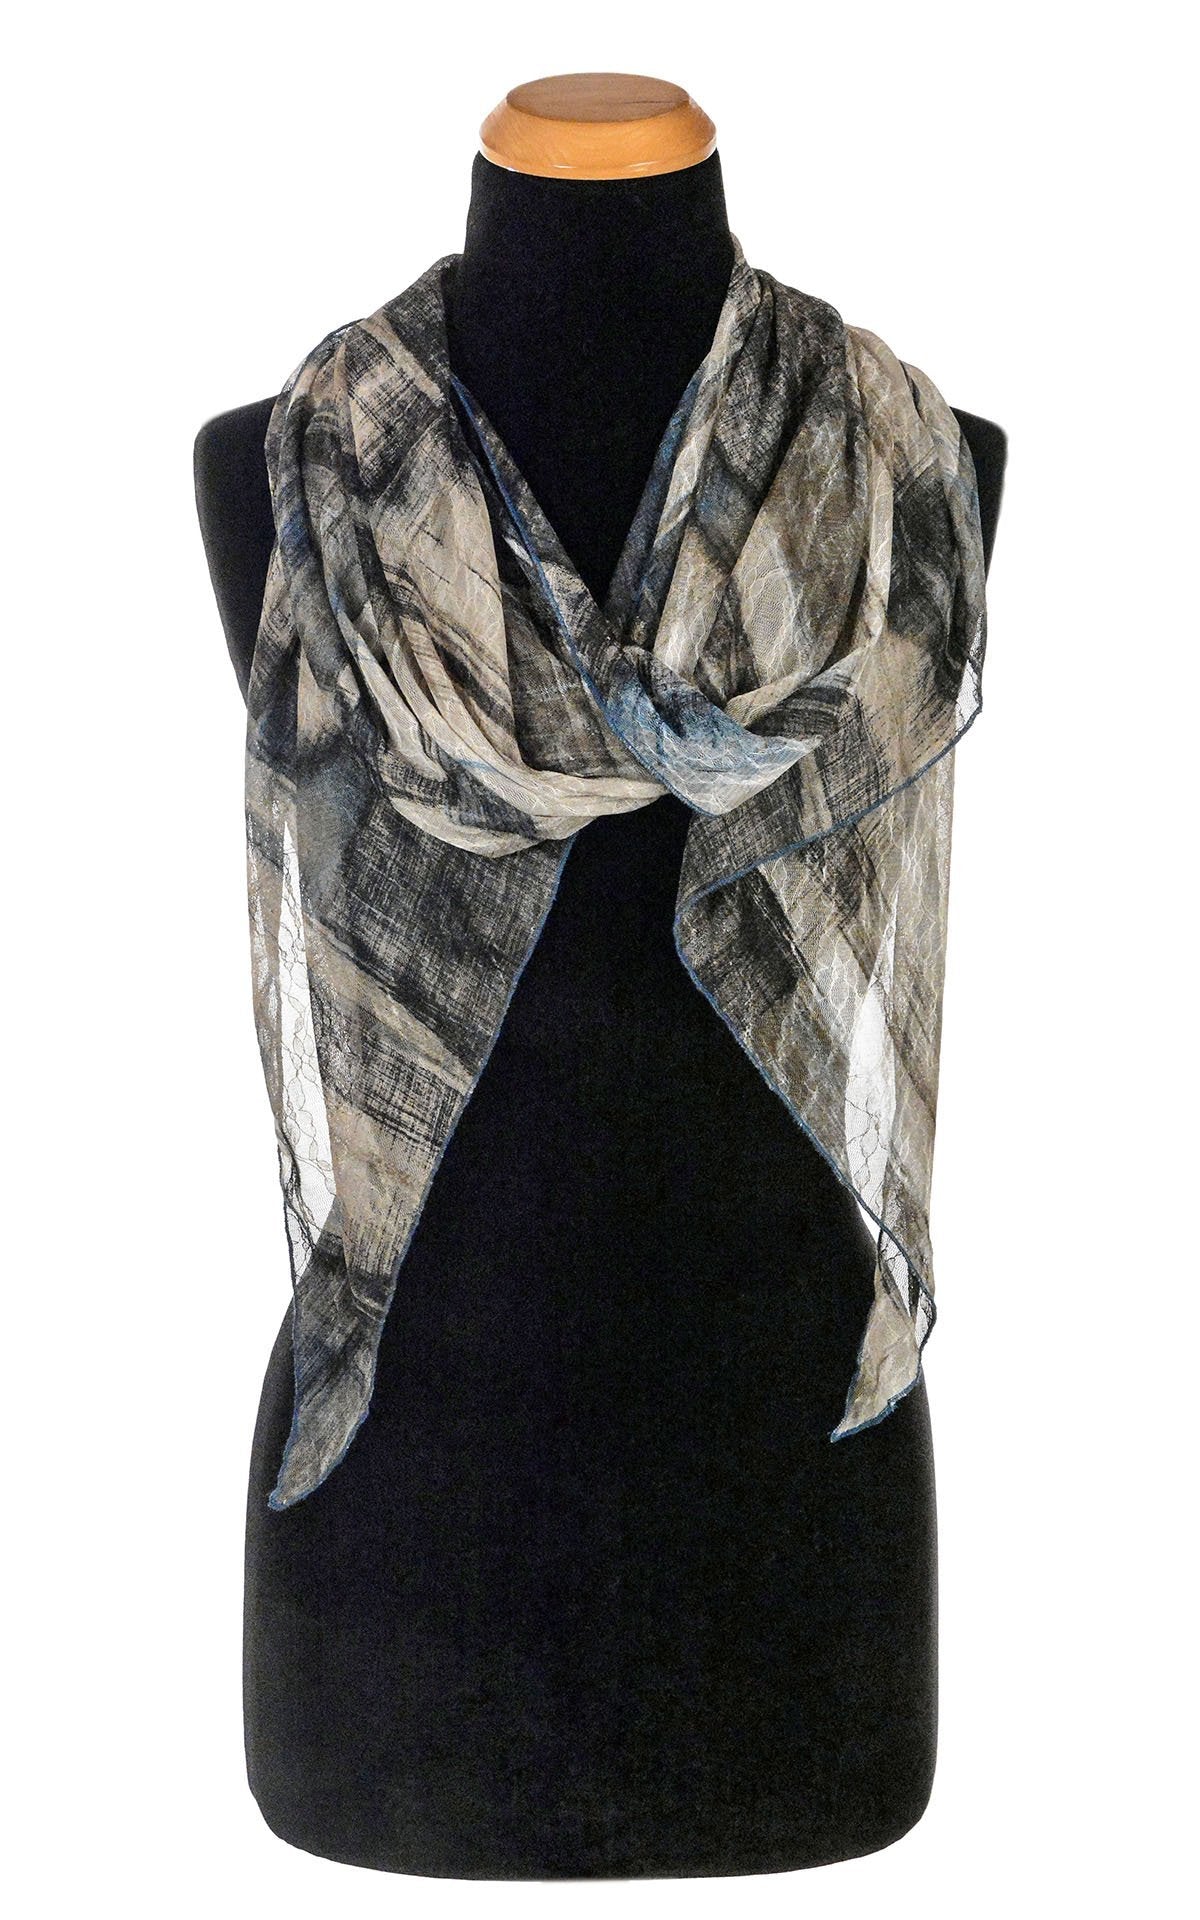 Handkerchief Scarf - Lovely Lace in Blue